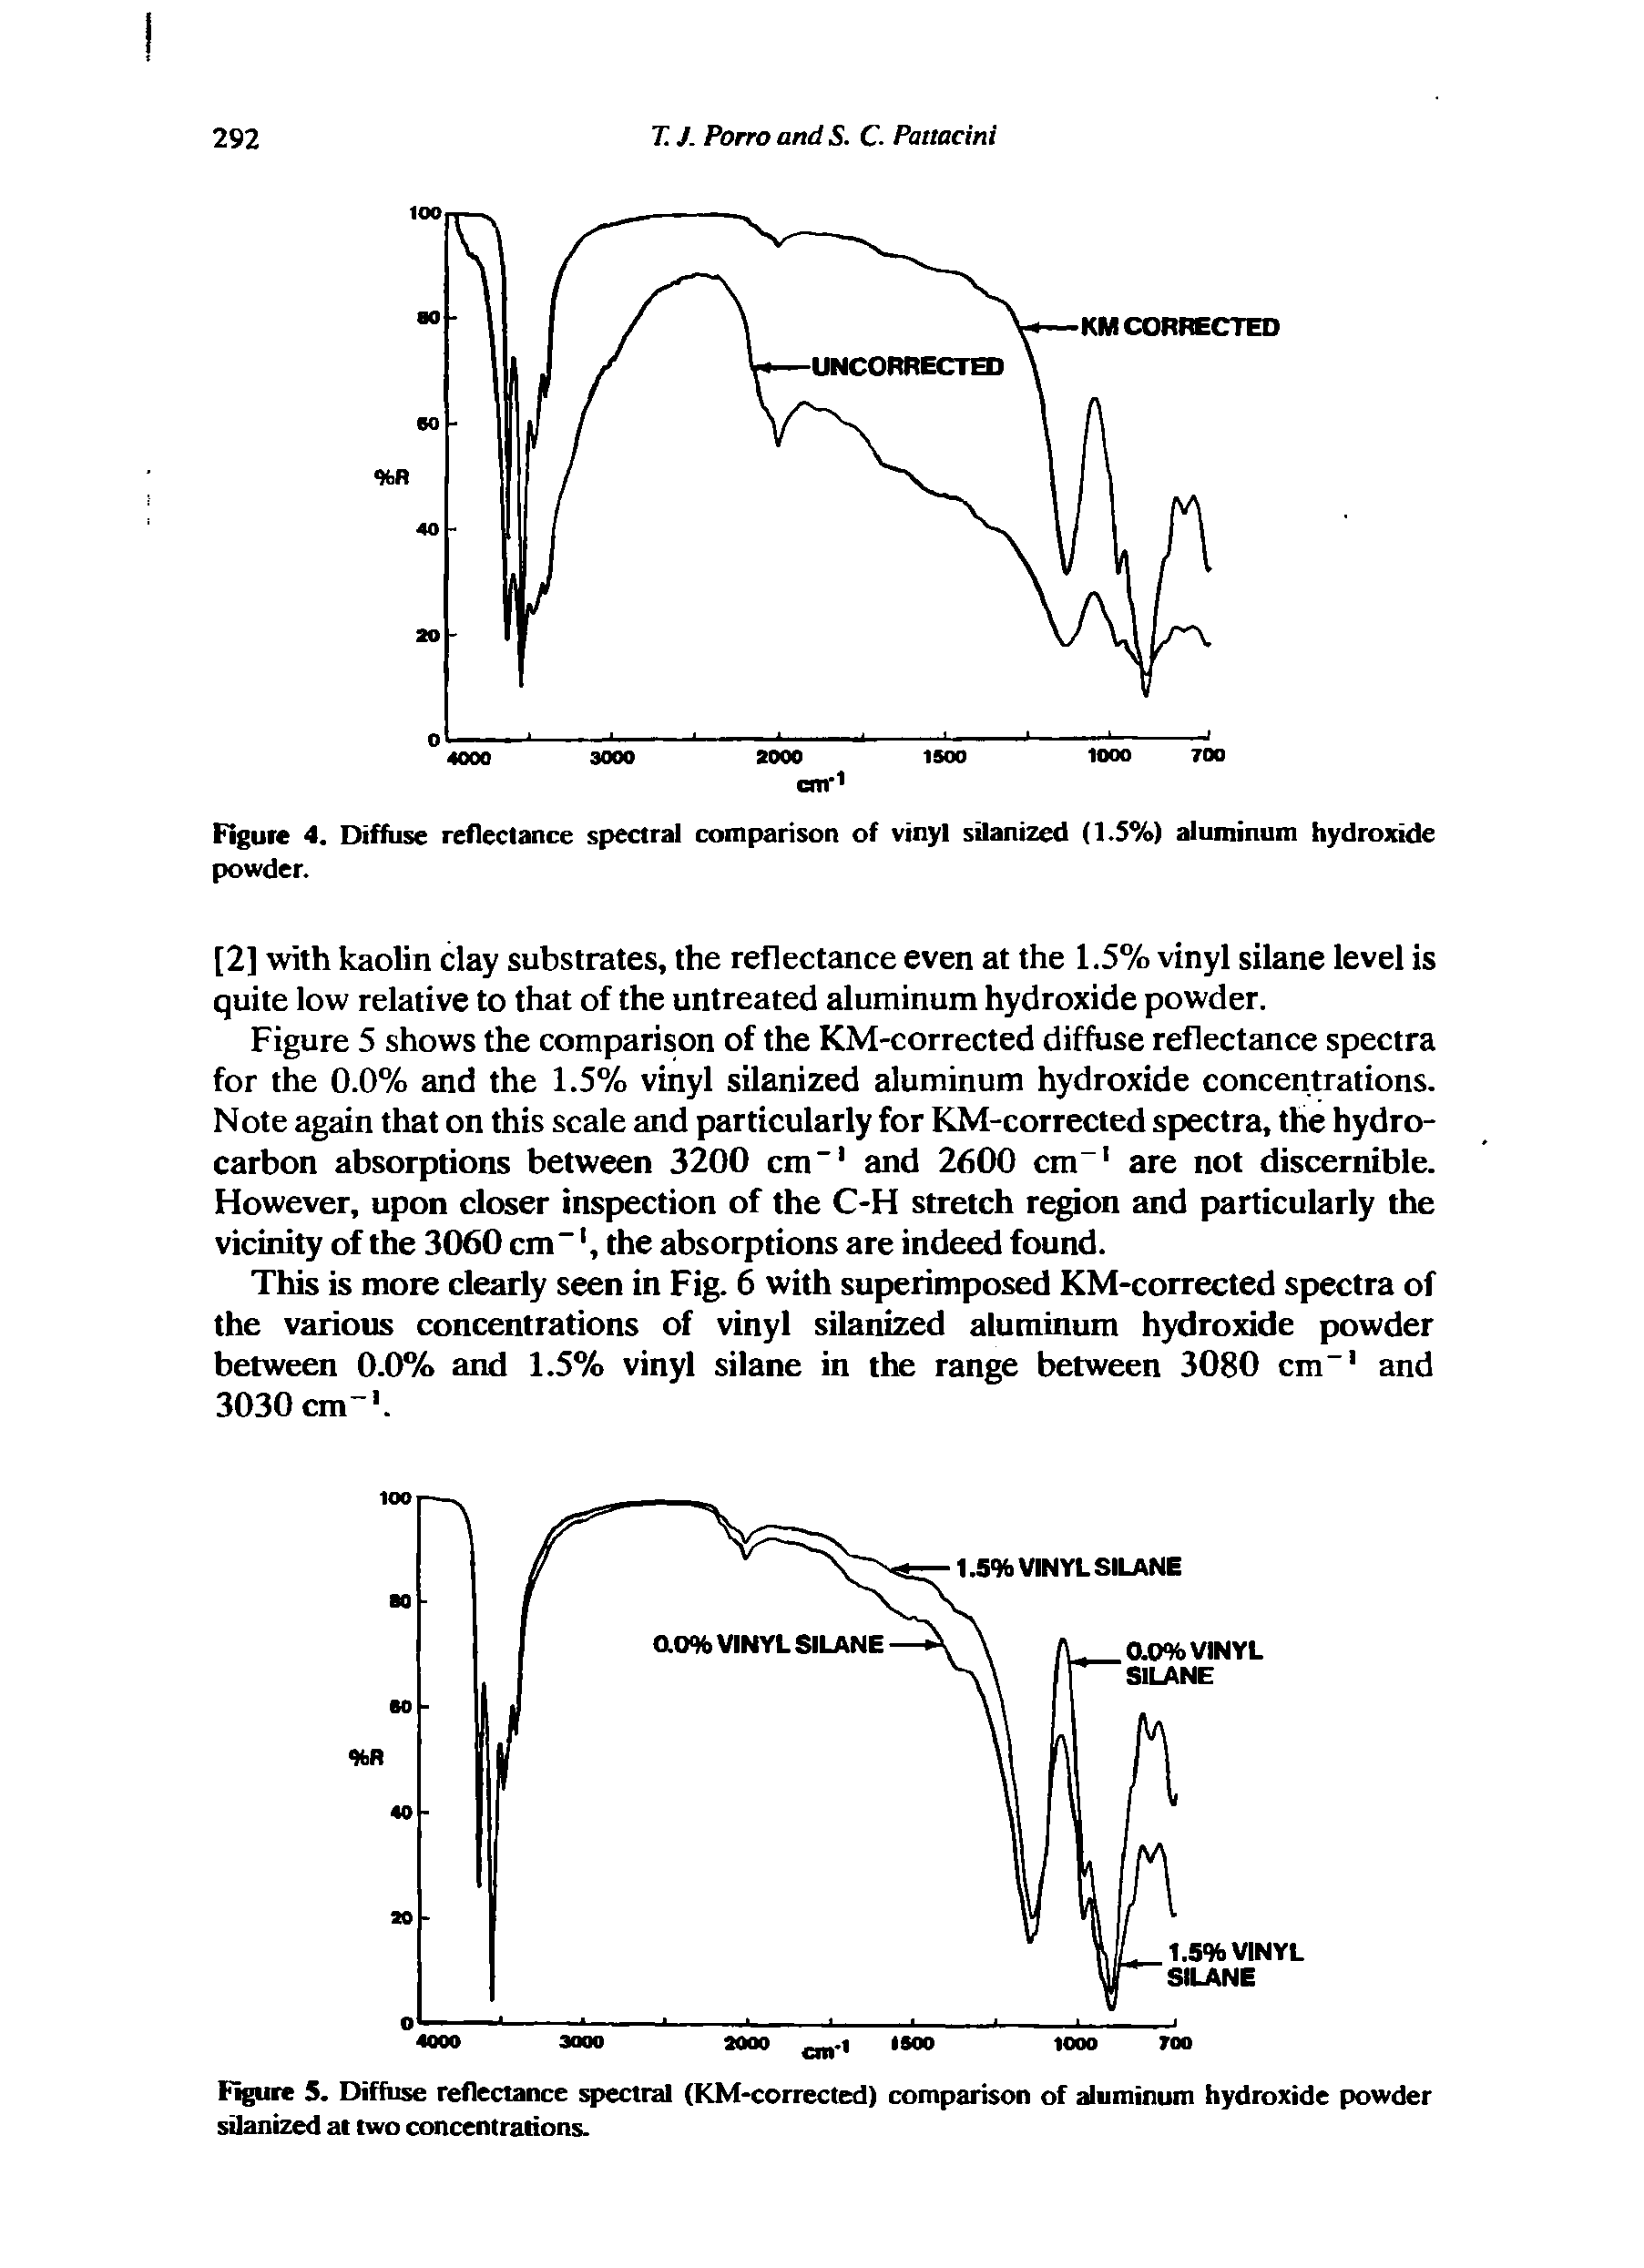 Figure 5. Diffuse reflectance spectral (KM-corrected) comparison of aluminum hydroxide powder silanized at two concentrations.